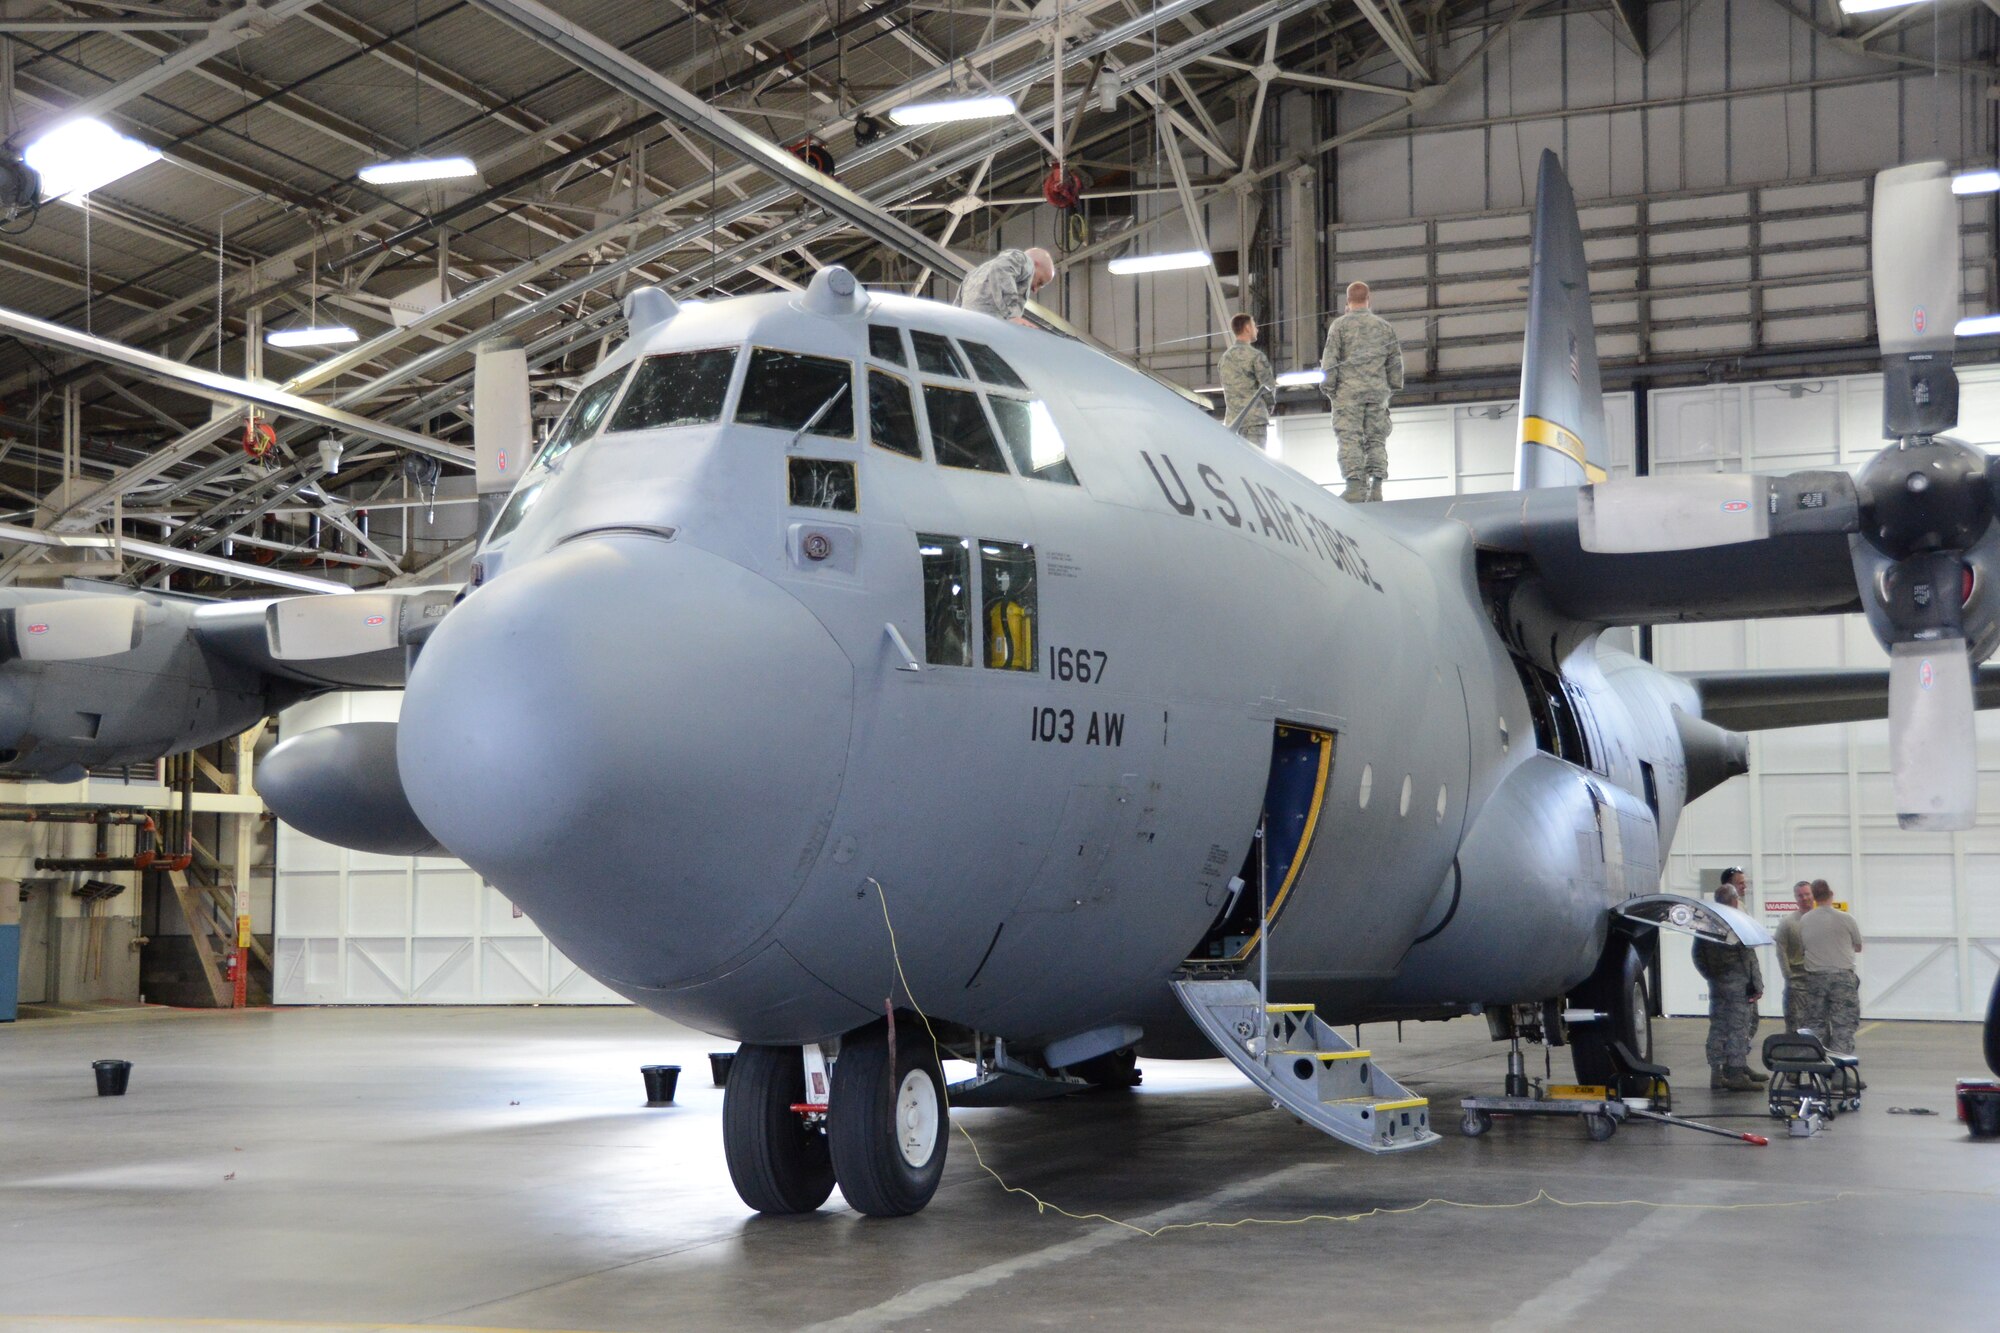 Personnel from the 103rd Maintenance Group begin training on the newly-received C-130H Hercules Friday, Oct. 25, 2013, at Bradley Air National Guard Base, East Granby, Conn. This is the first out of eight C-130H model aircraft expected to be assigned to the 103rd Airlift Wing and that the unit will operate in support of foreign and domestic airlift missions. (U.S. Air National Guard photo by Master Sgt. Erin E. McNamara)